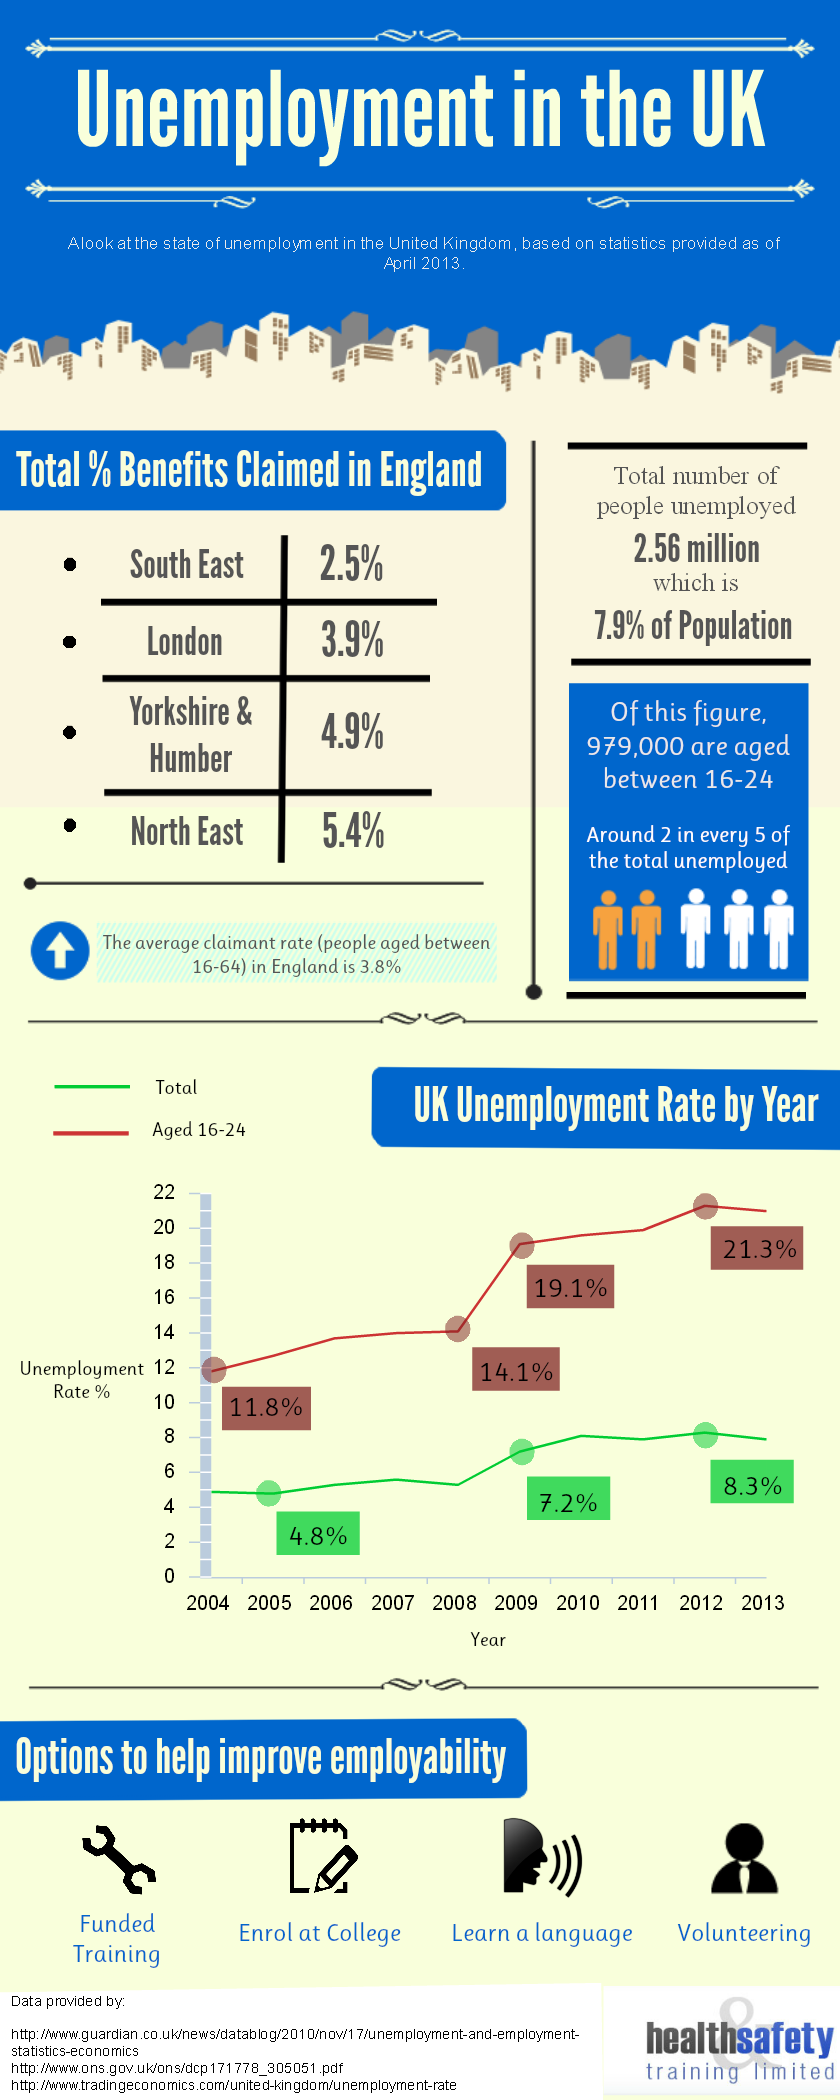 Unemployment in the UK in 2013